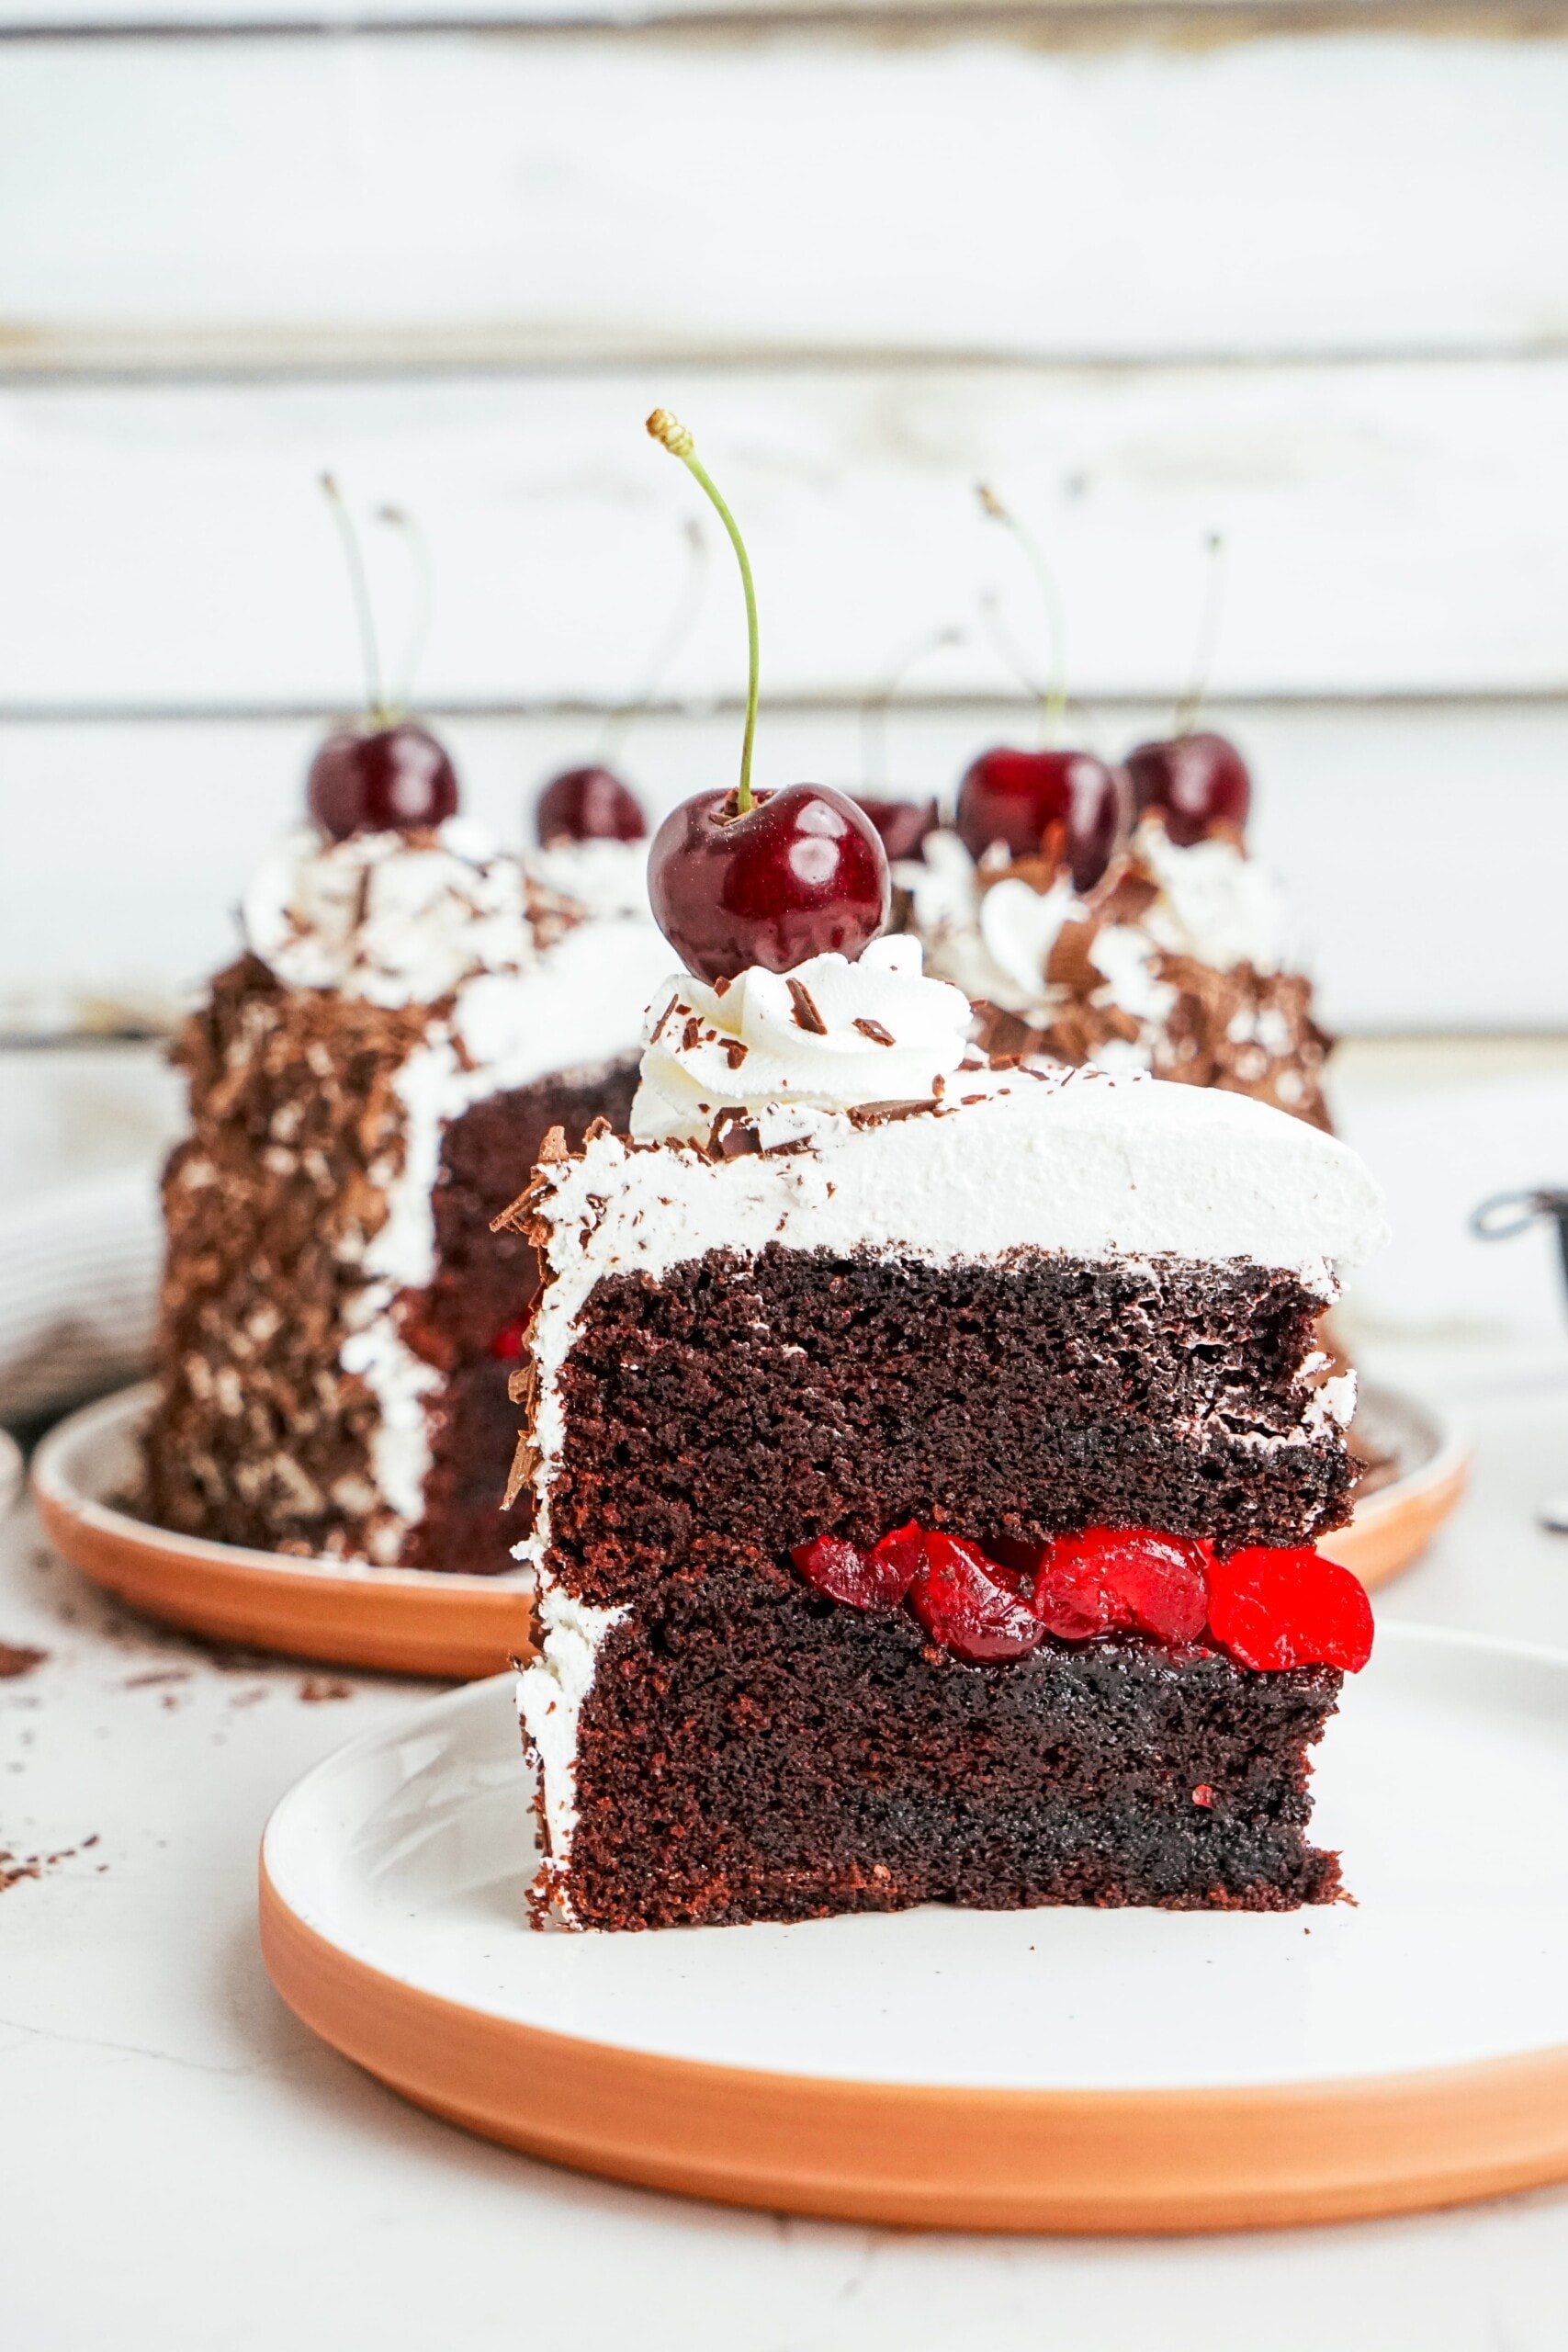 4 Home Bakers on Childhood Memories of Black Forest Cake